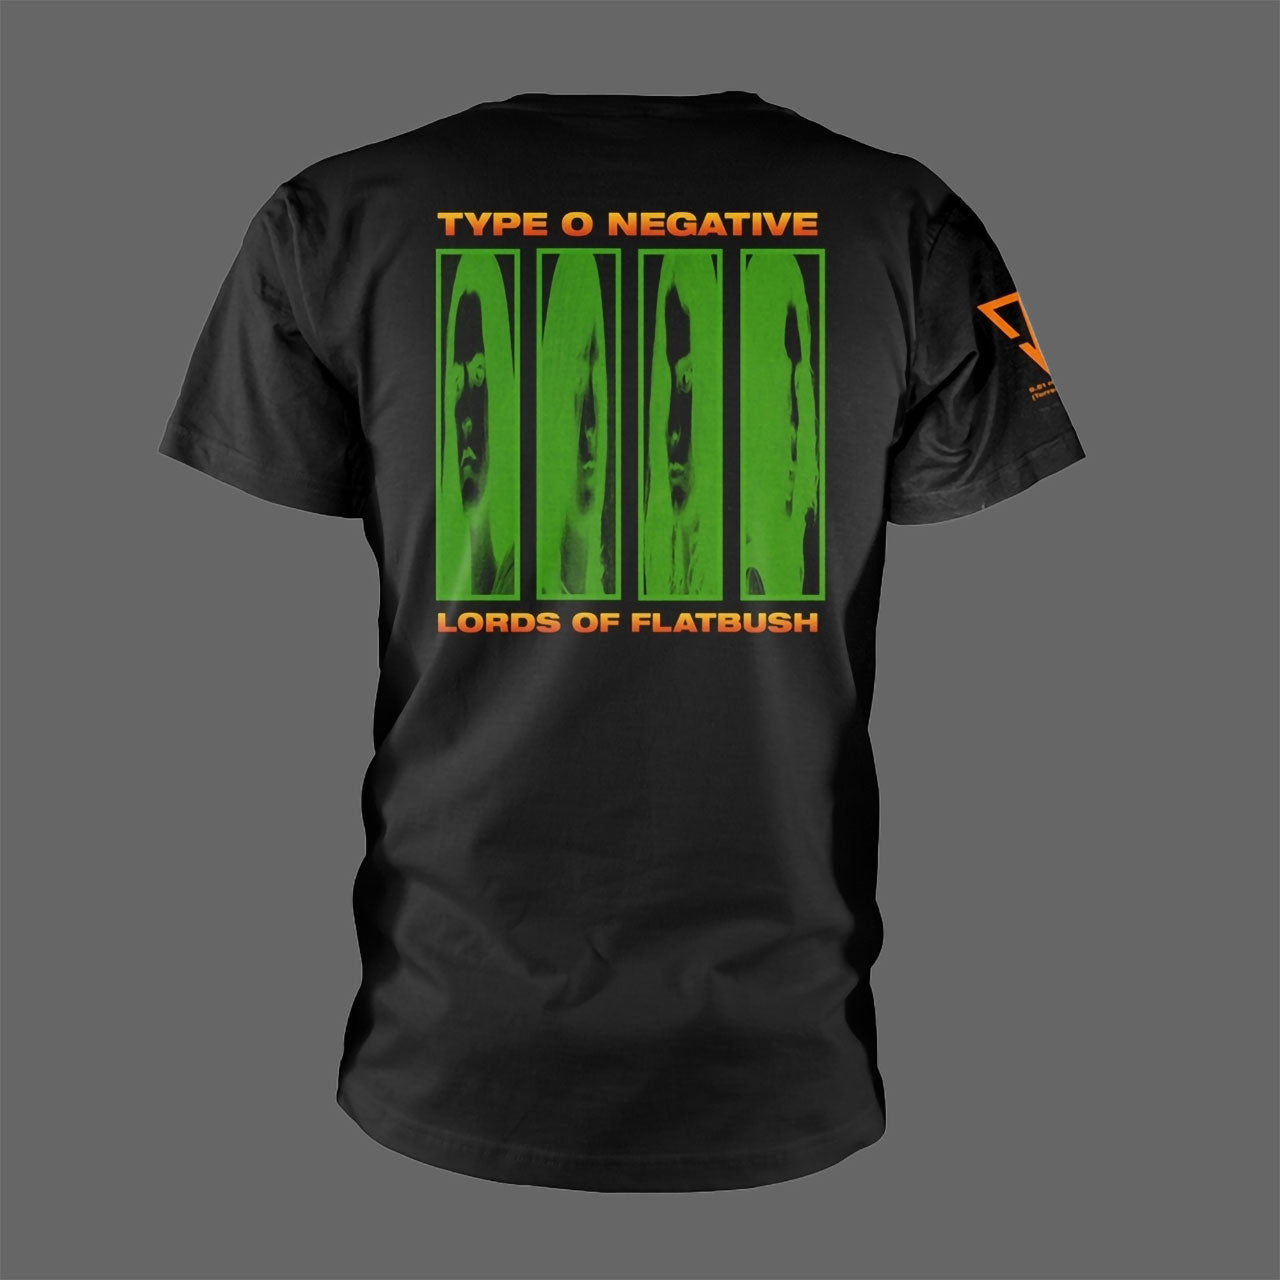 Type O Negative - Suspended in Dusk (T-Shirt)